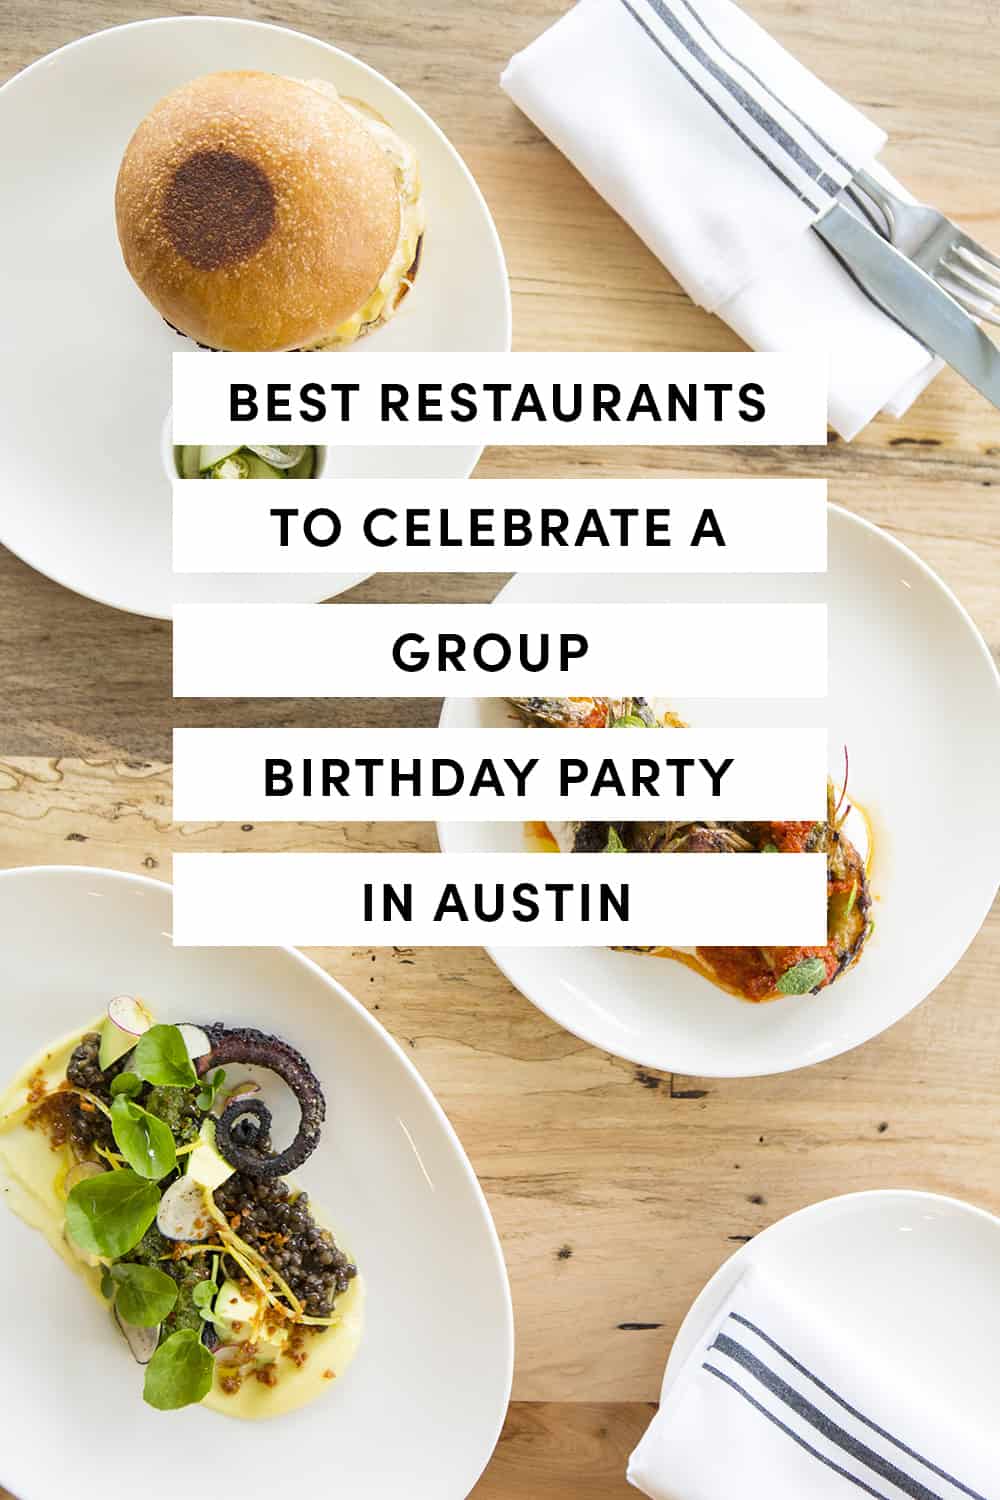 32 Best Restaurants To Celebrate A Group Birthday Party In Austin